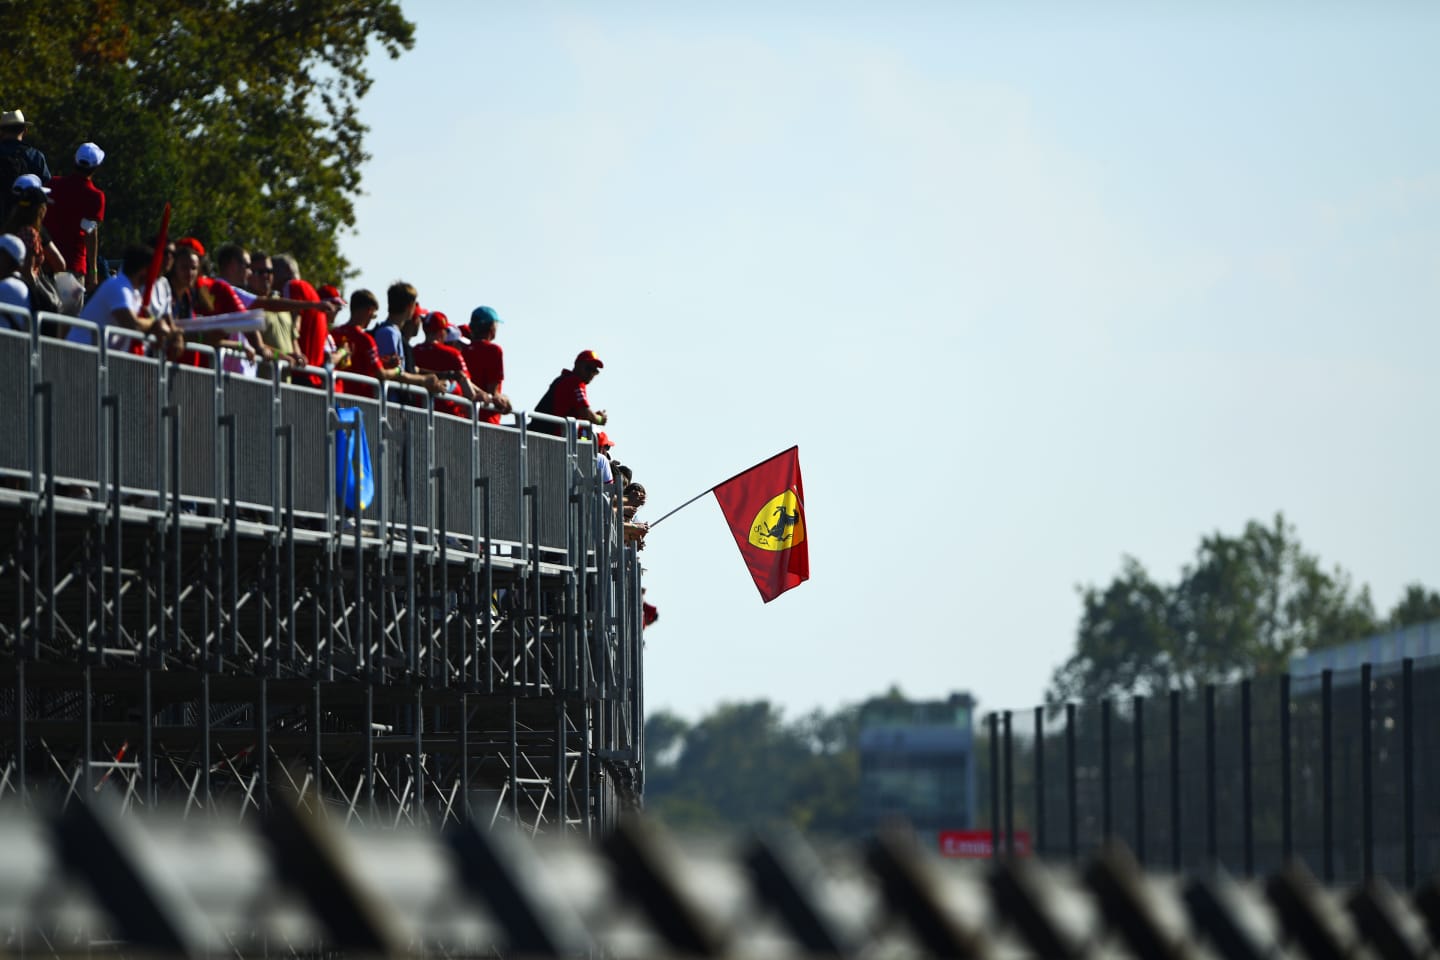 MONZA, ITALY - SEPTEMBER 12: Ferrari fans show their support during the F1 Grand Prix of Italy at Autodromo di Monza on September 12, 2021 in Monza, Italy. (Photo by Rudy Carezzevoli/Getty Images)